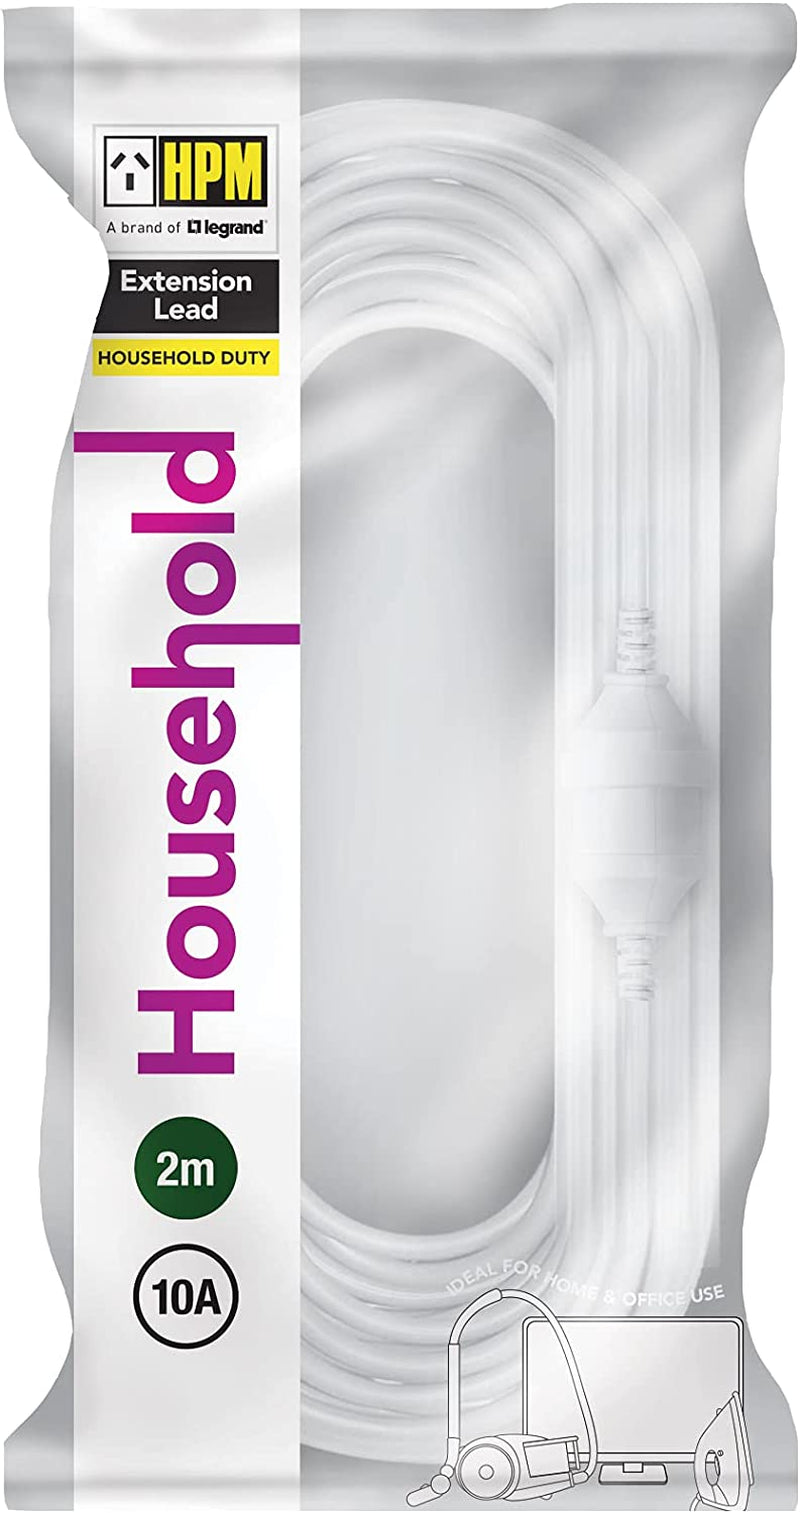 HPM Household Duty Extension Lead White 3M